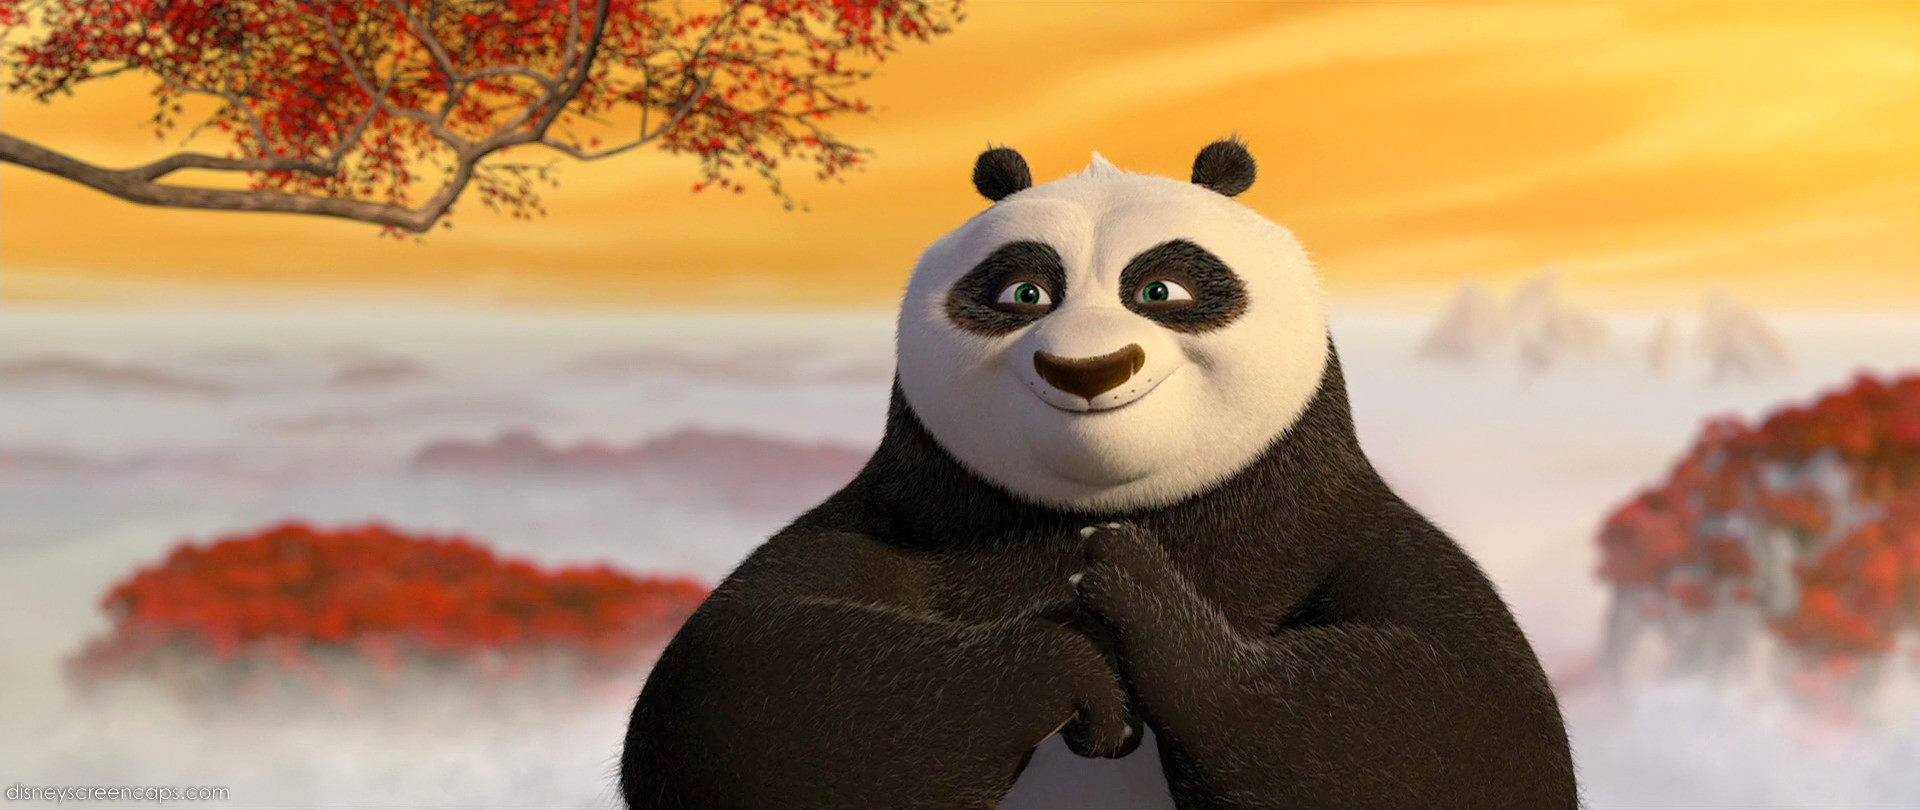 KUNG FU PANDA 3 CHARACTERS STAR IN NEW PSAS TO PROMOTE 